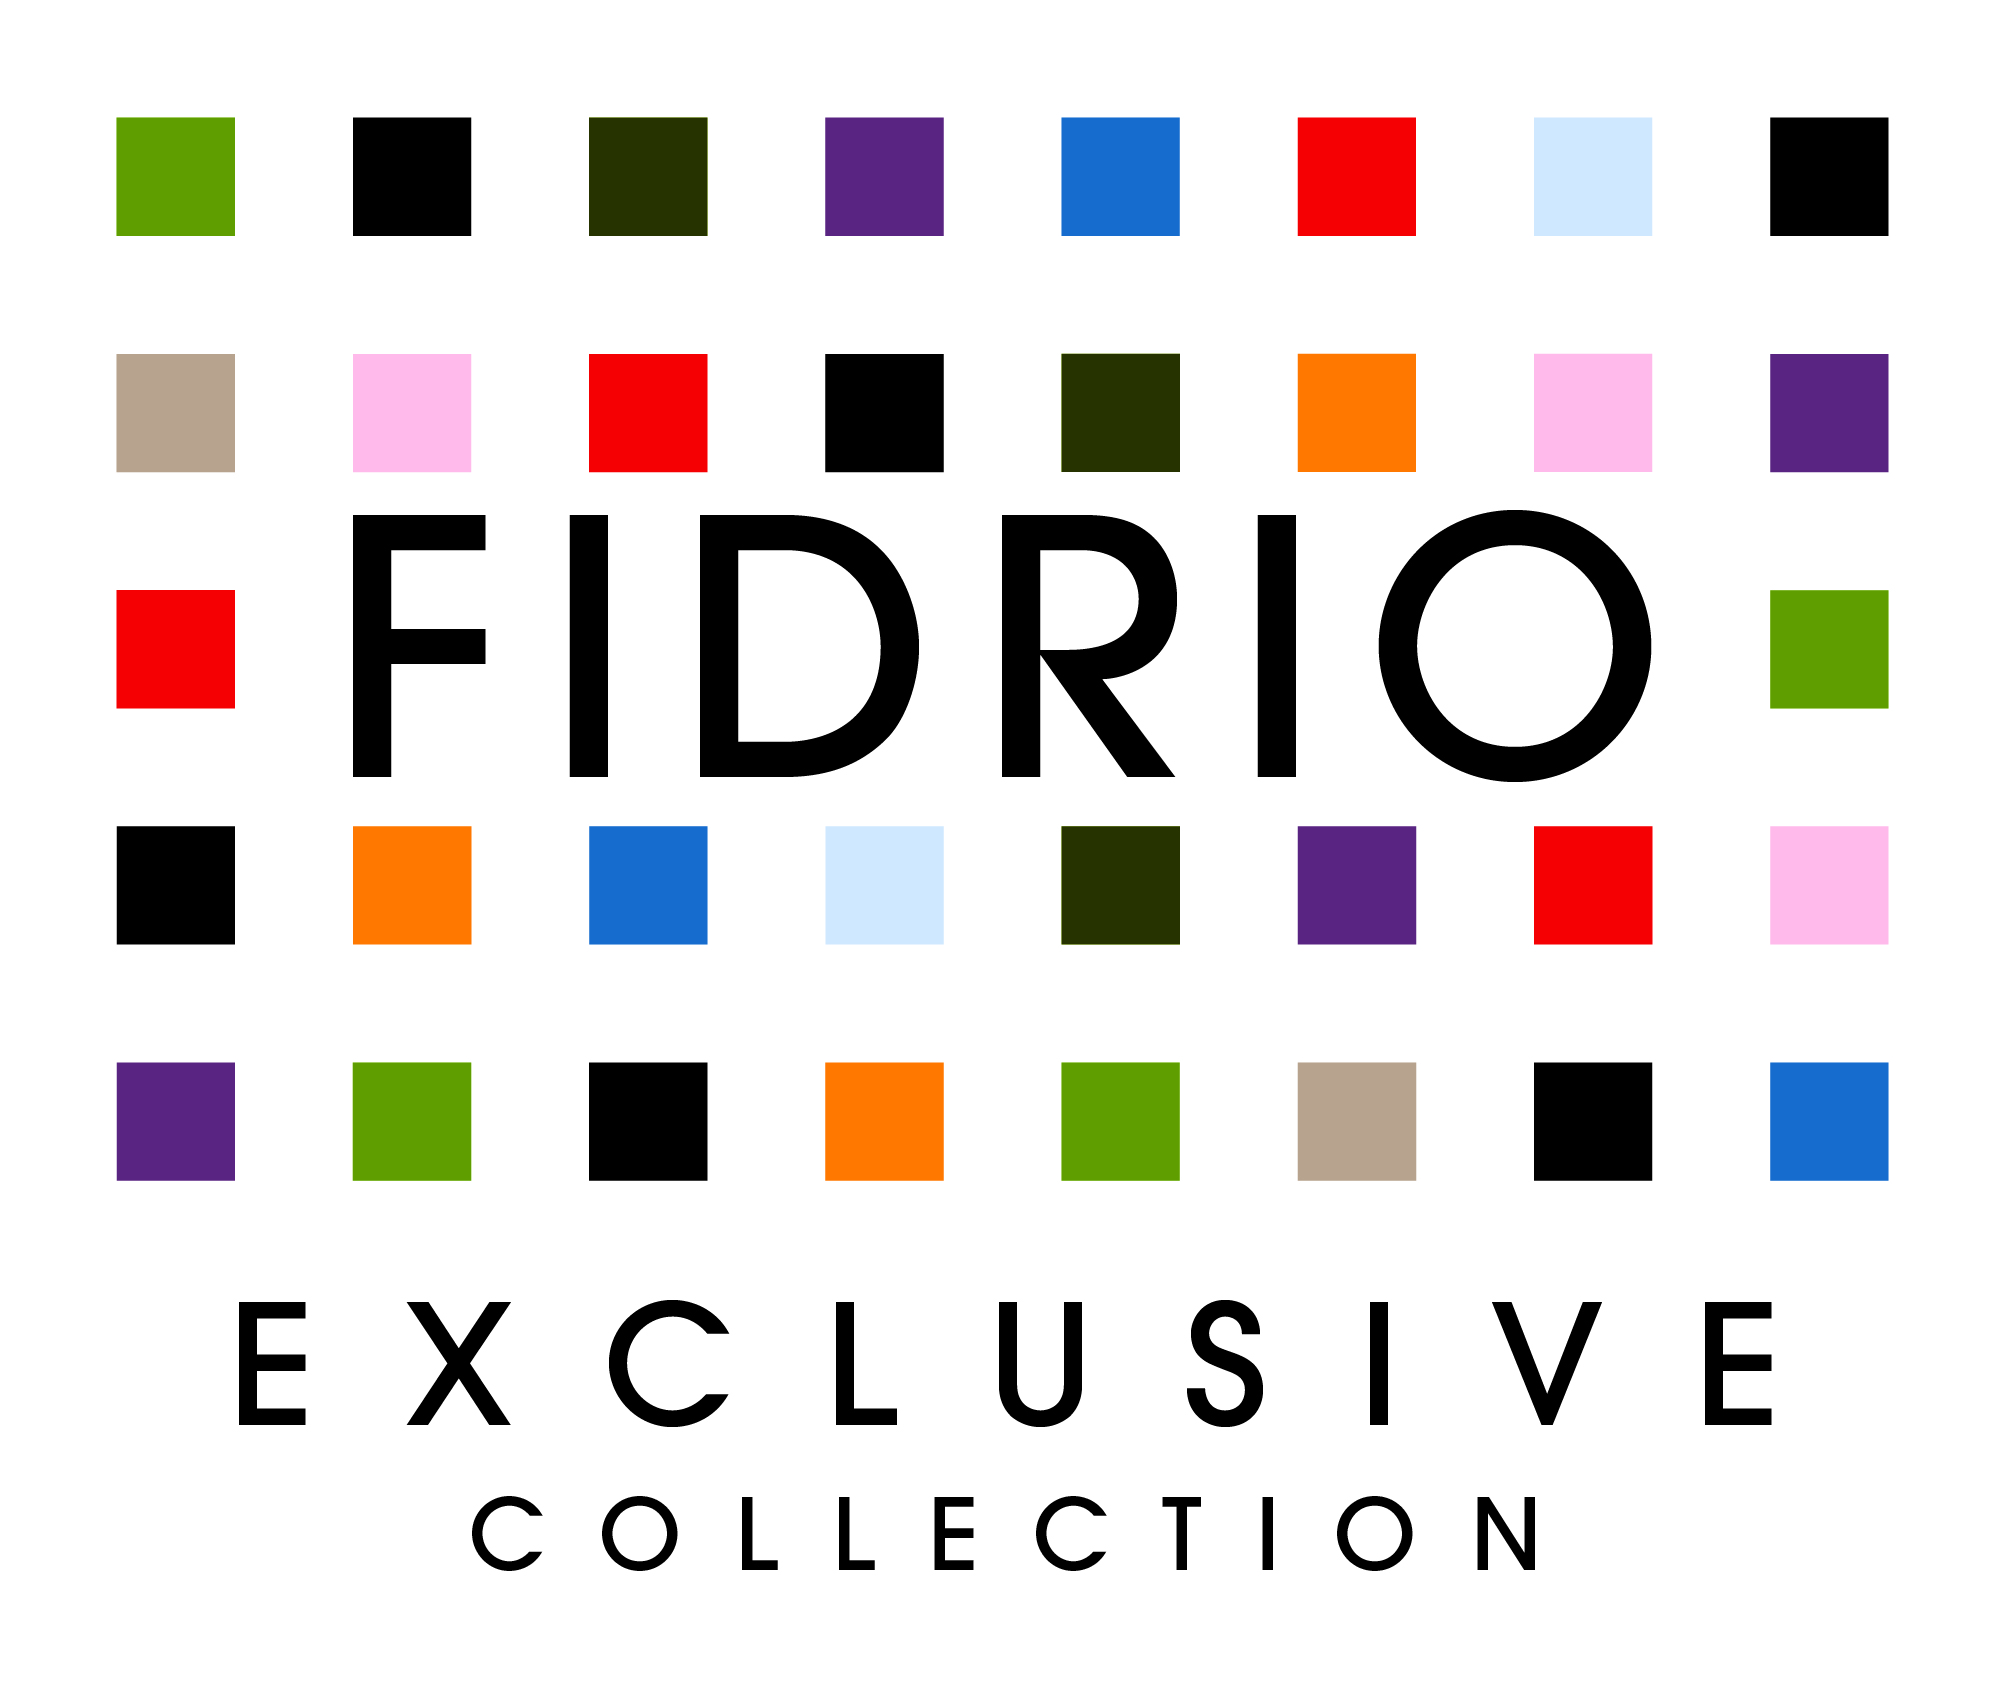 FIDRIO Exclusive Collection